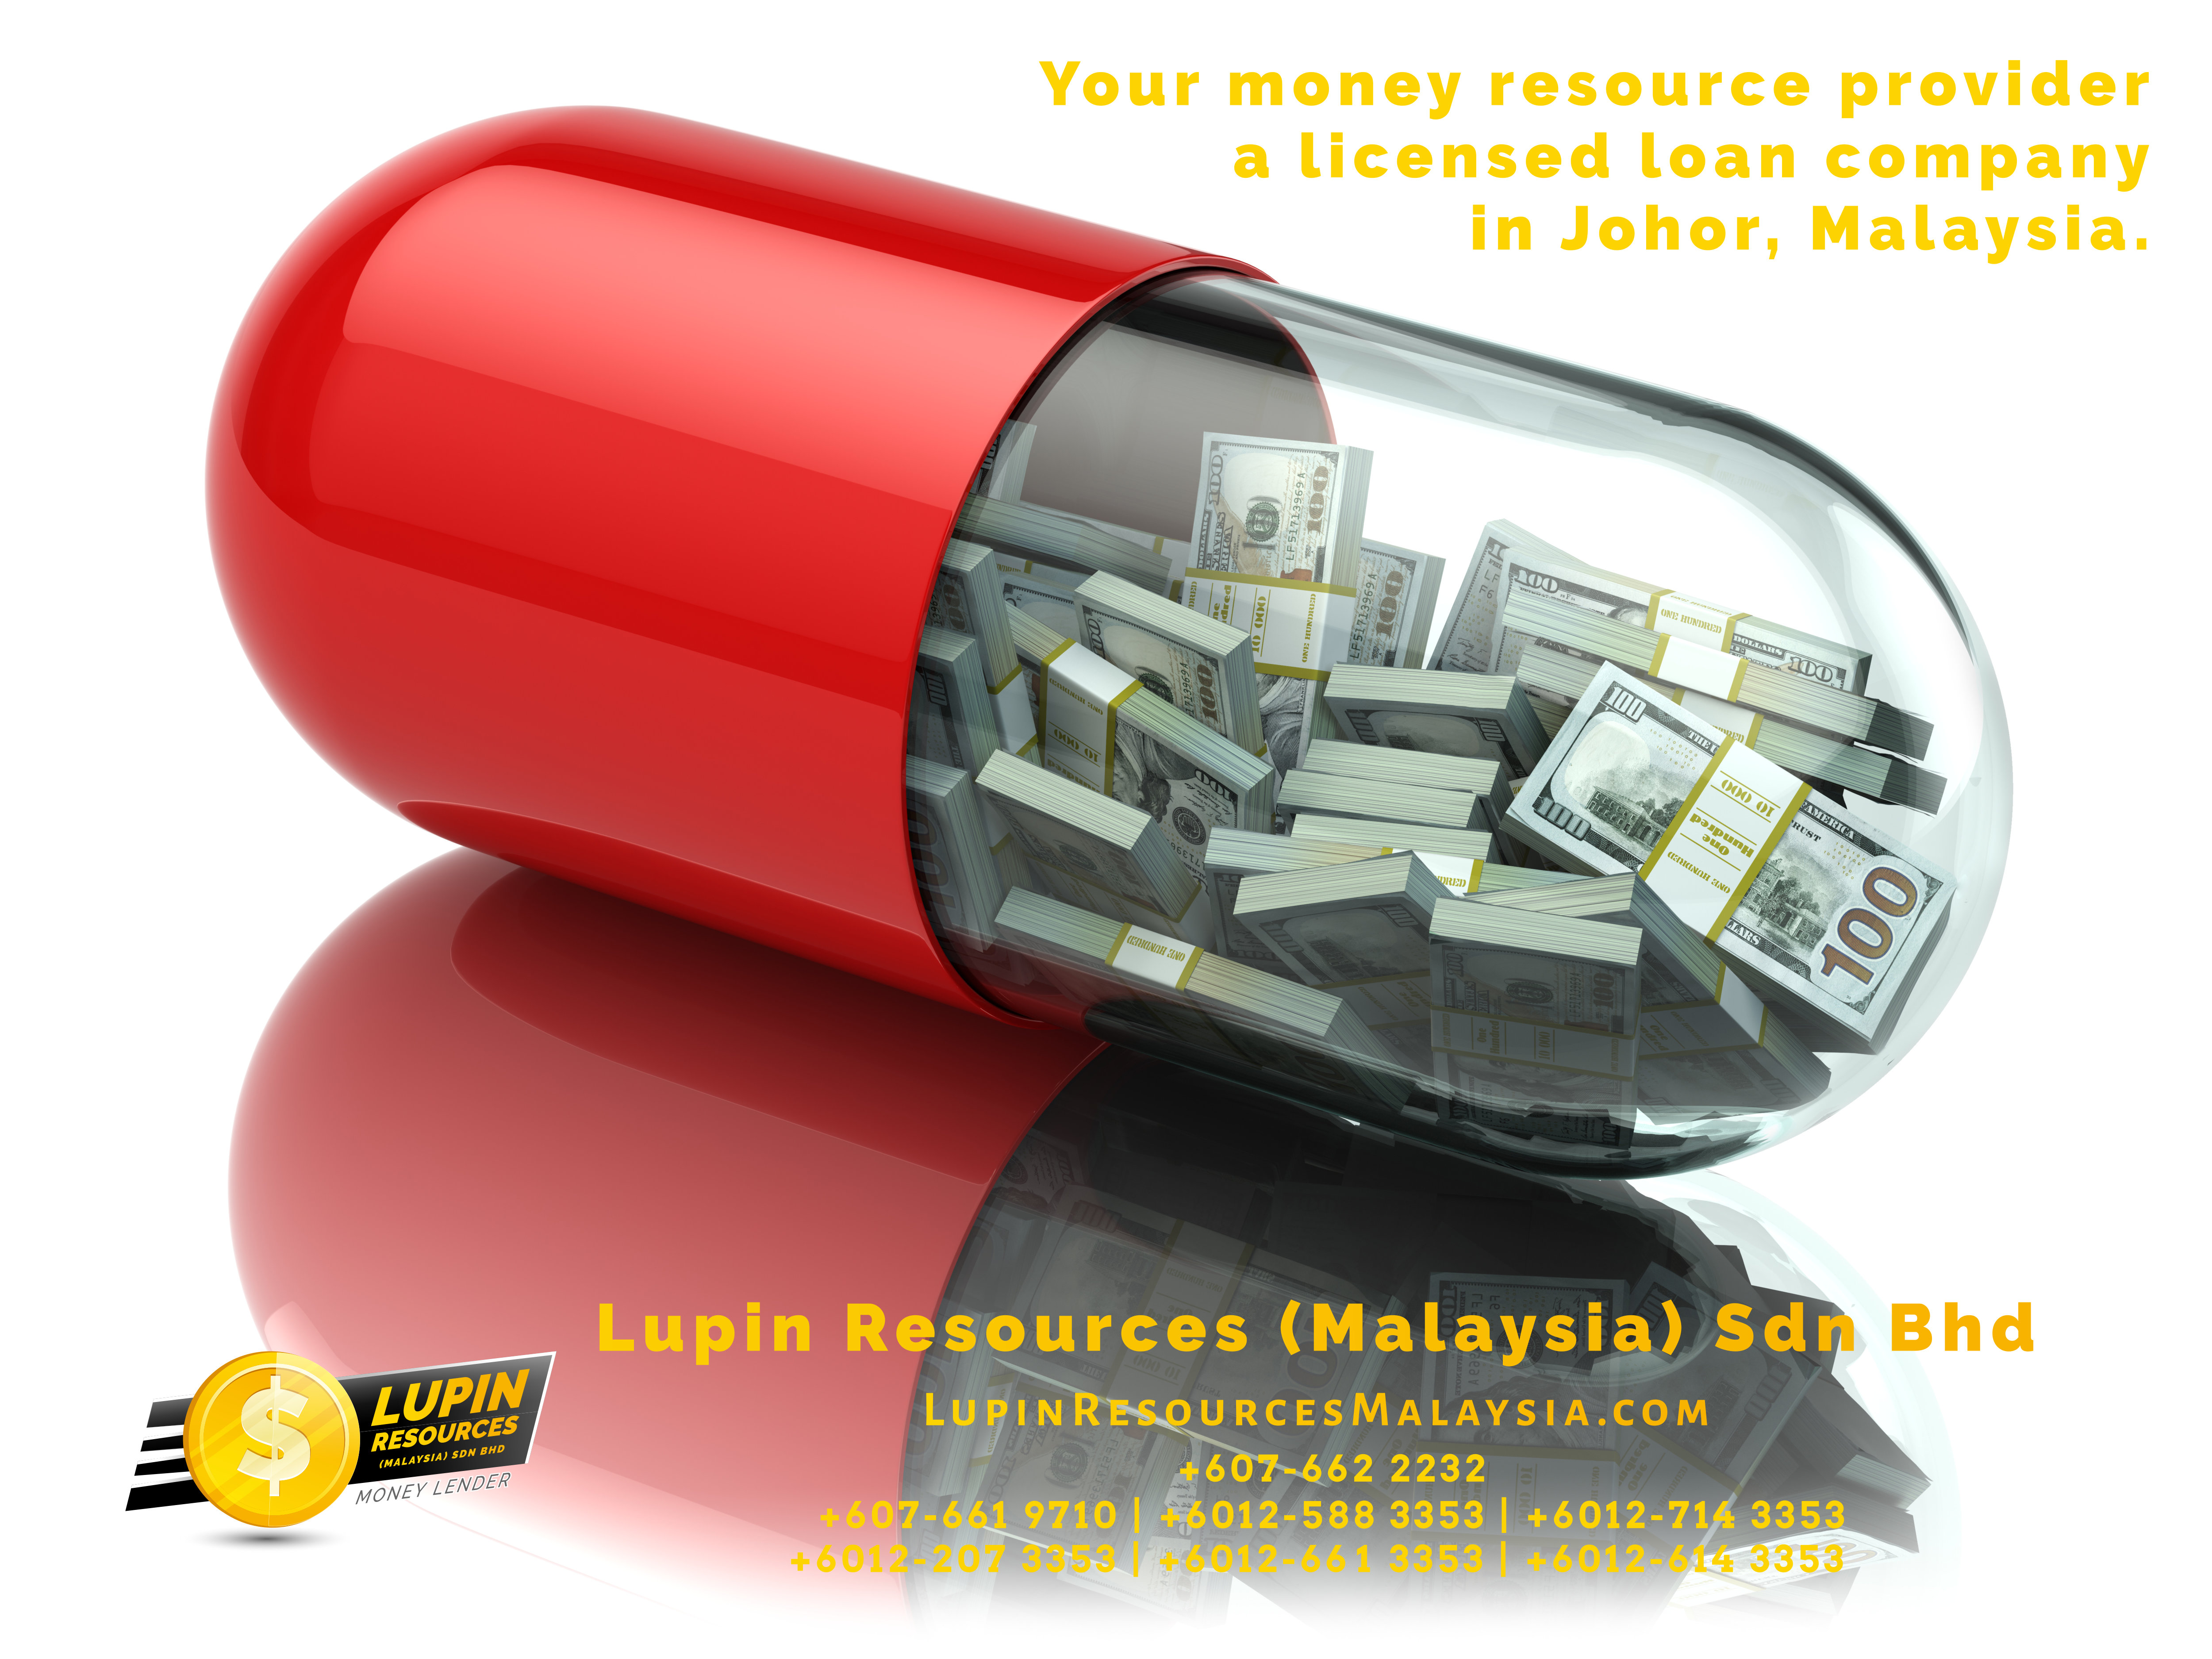 Johor Licensed Loan Company Licensed Money Lender Lupin Resources Malaysia SDN BHD Your money resource provider Kulai Johor Bahru Johor Malaysia Business Loan A01-19